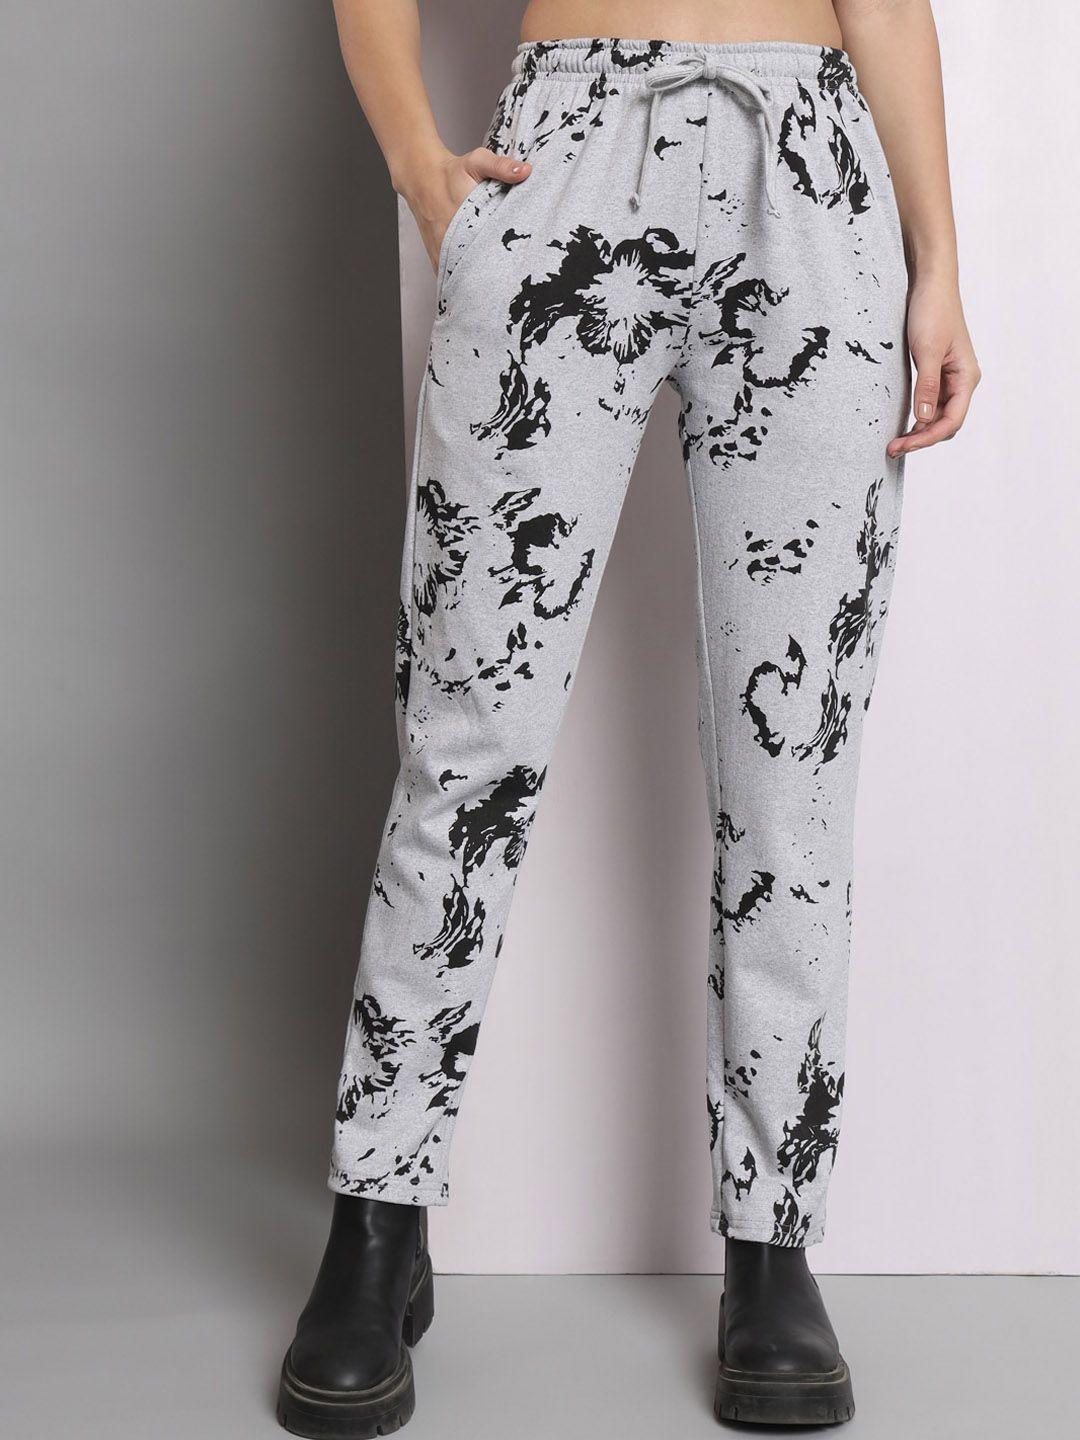 q-rious women abstract printed pure cotton trousers